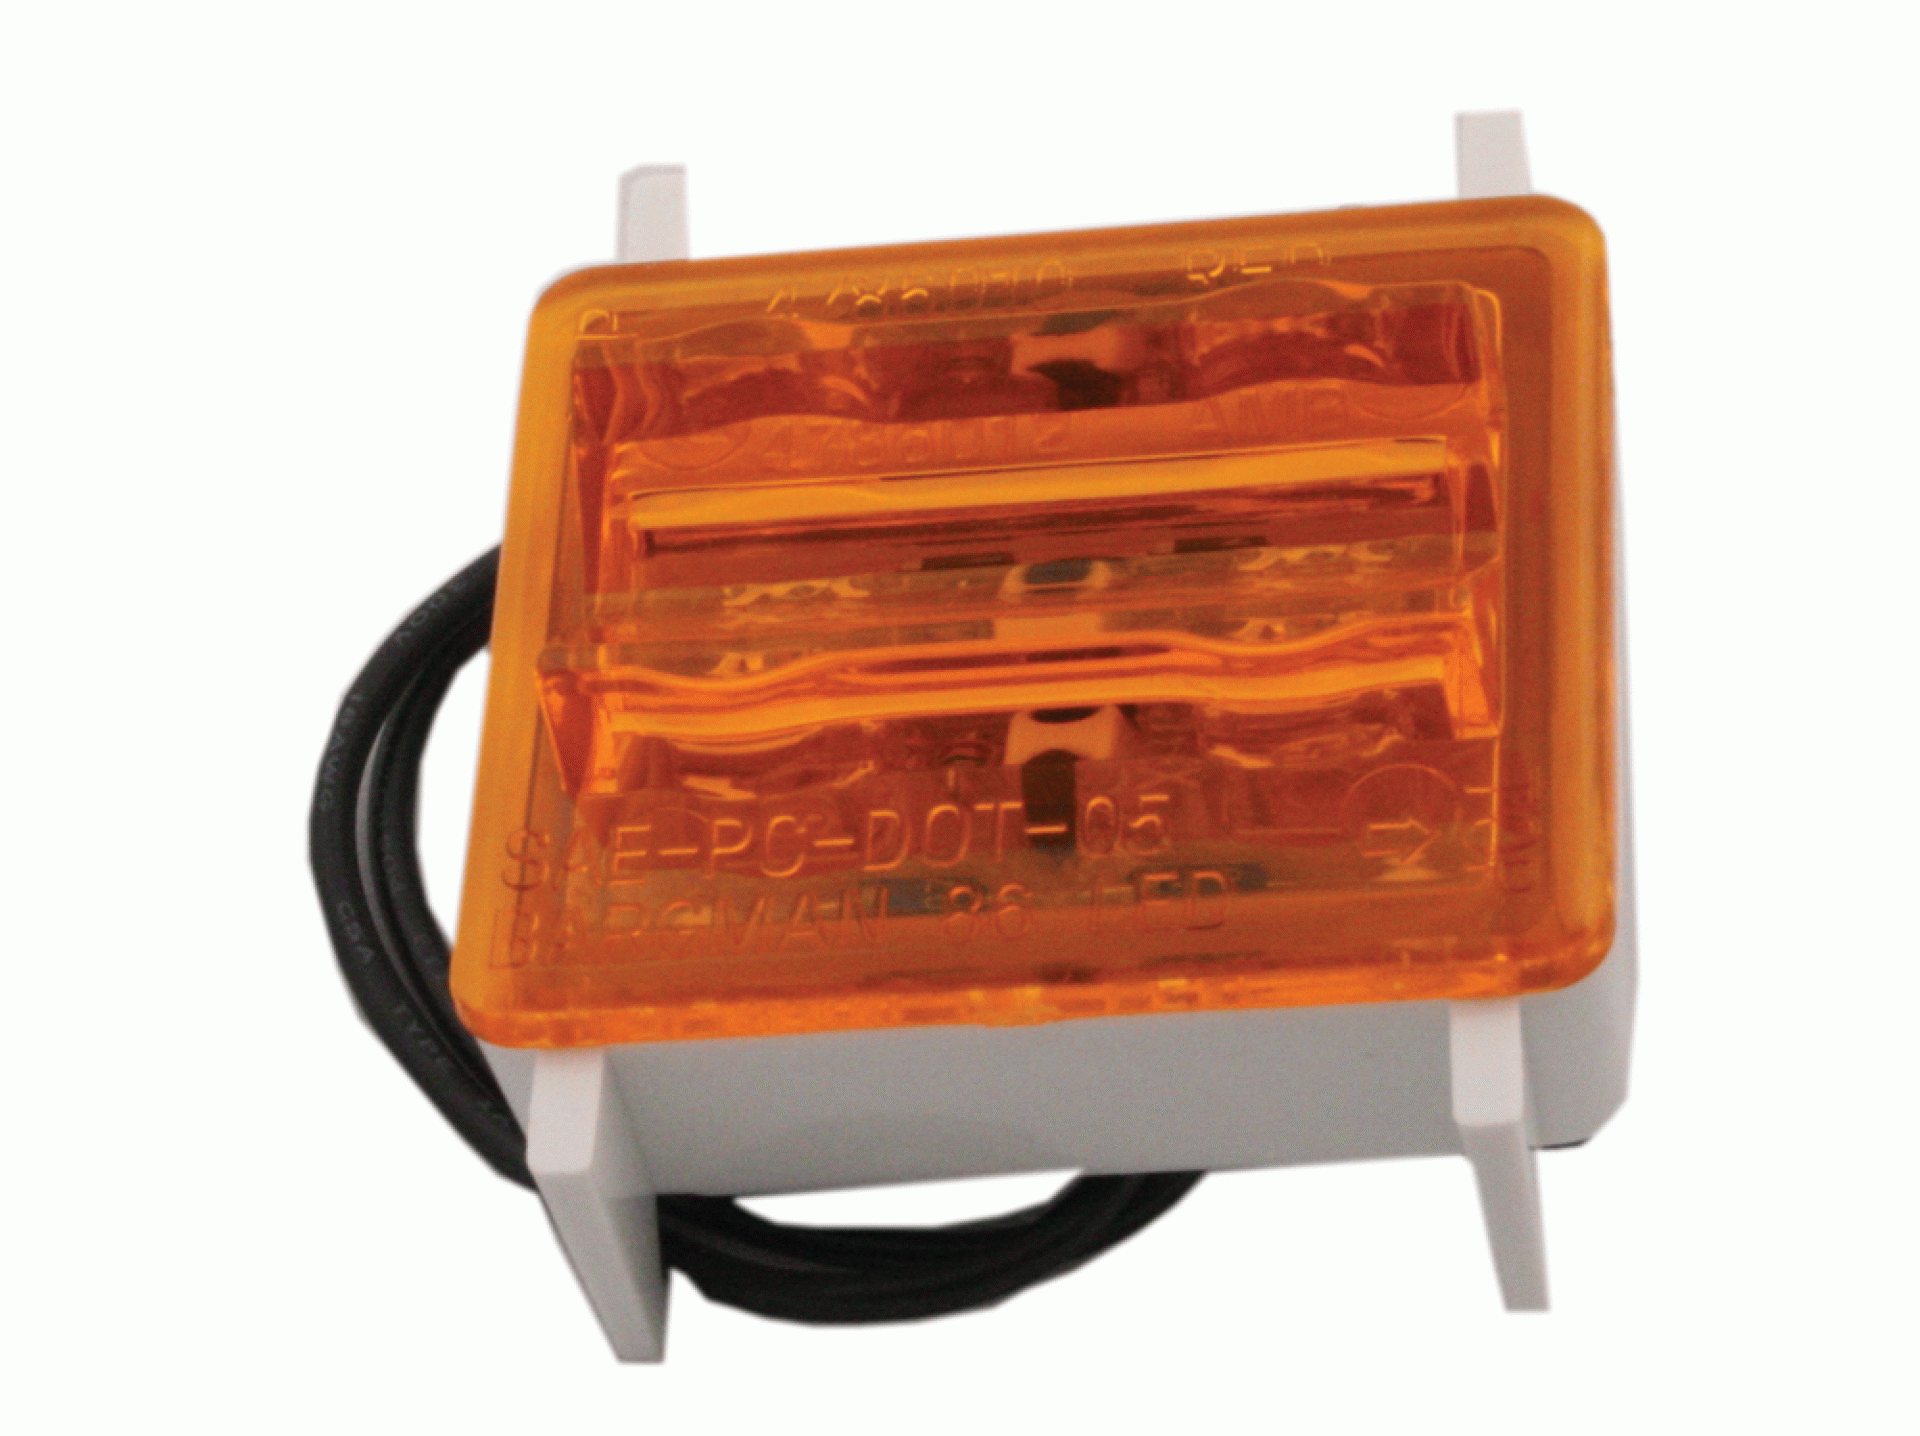 BARGMAN | 47-86-412 | LED TAIL LIGHT WRAP AROUND CLEARANCE MODULE - AMBER